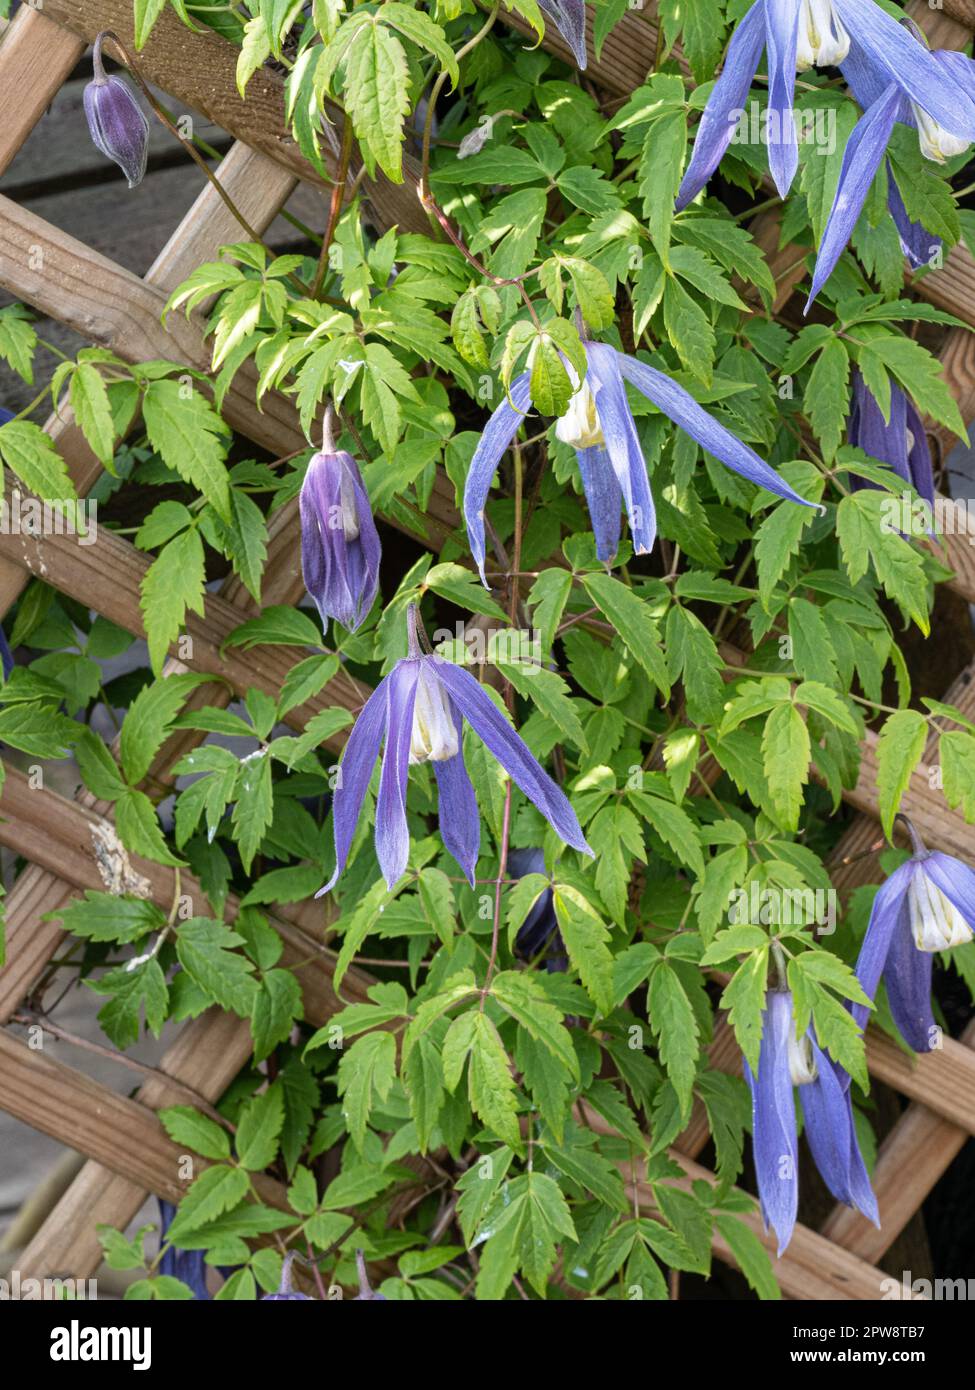 Clematis alpina 'Blue Dancer' growing on a trellis showing the hanging pale blue flowers Stock Photo